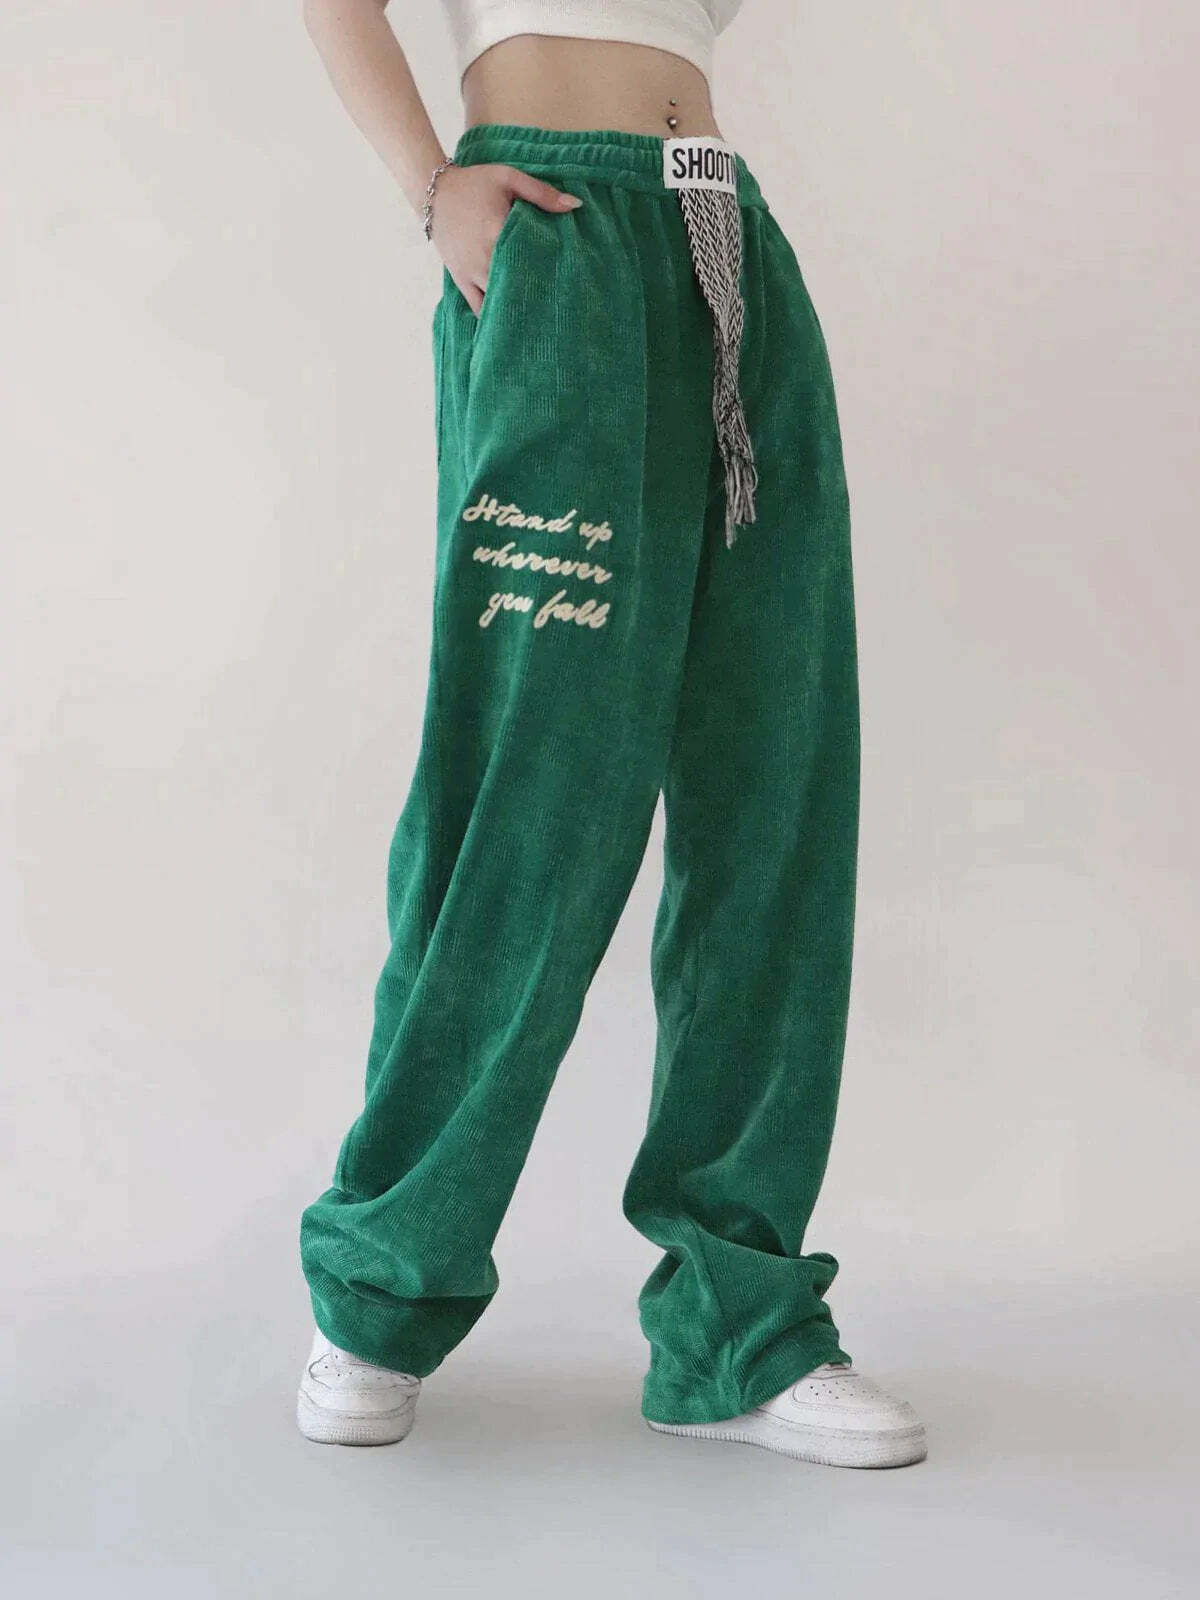 luxurious letter sweatpants edgy & urban style 5203